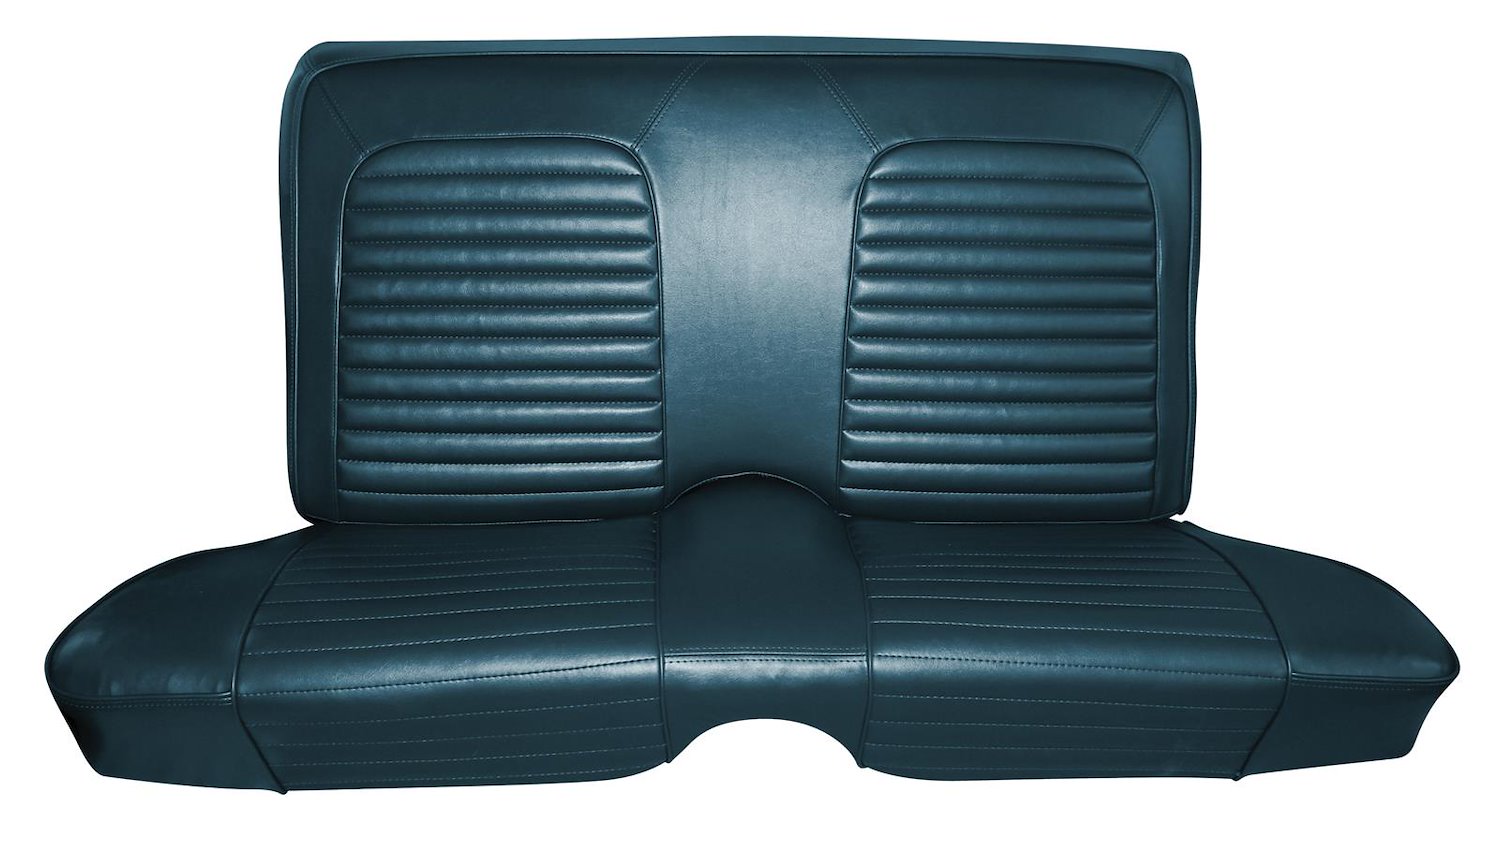 1967 Mercury Cougar XR-7 Interior Rear Bench Seat Upholstery Set